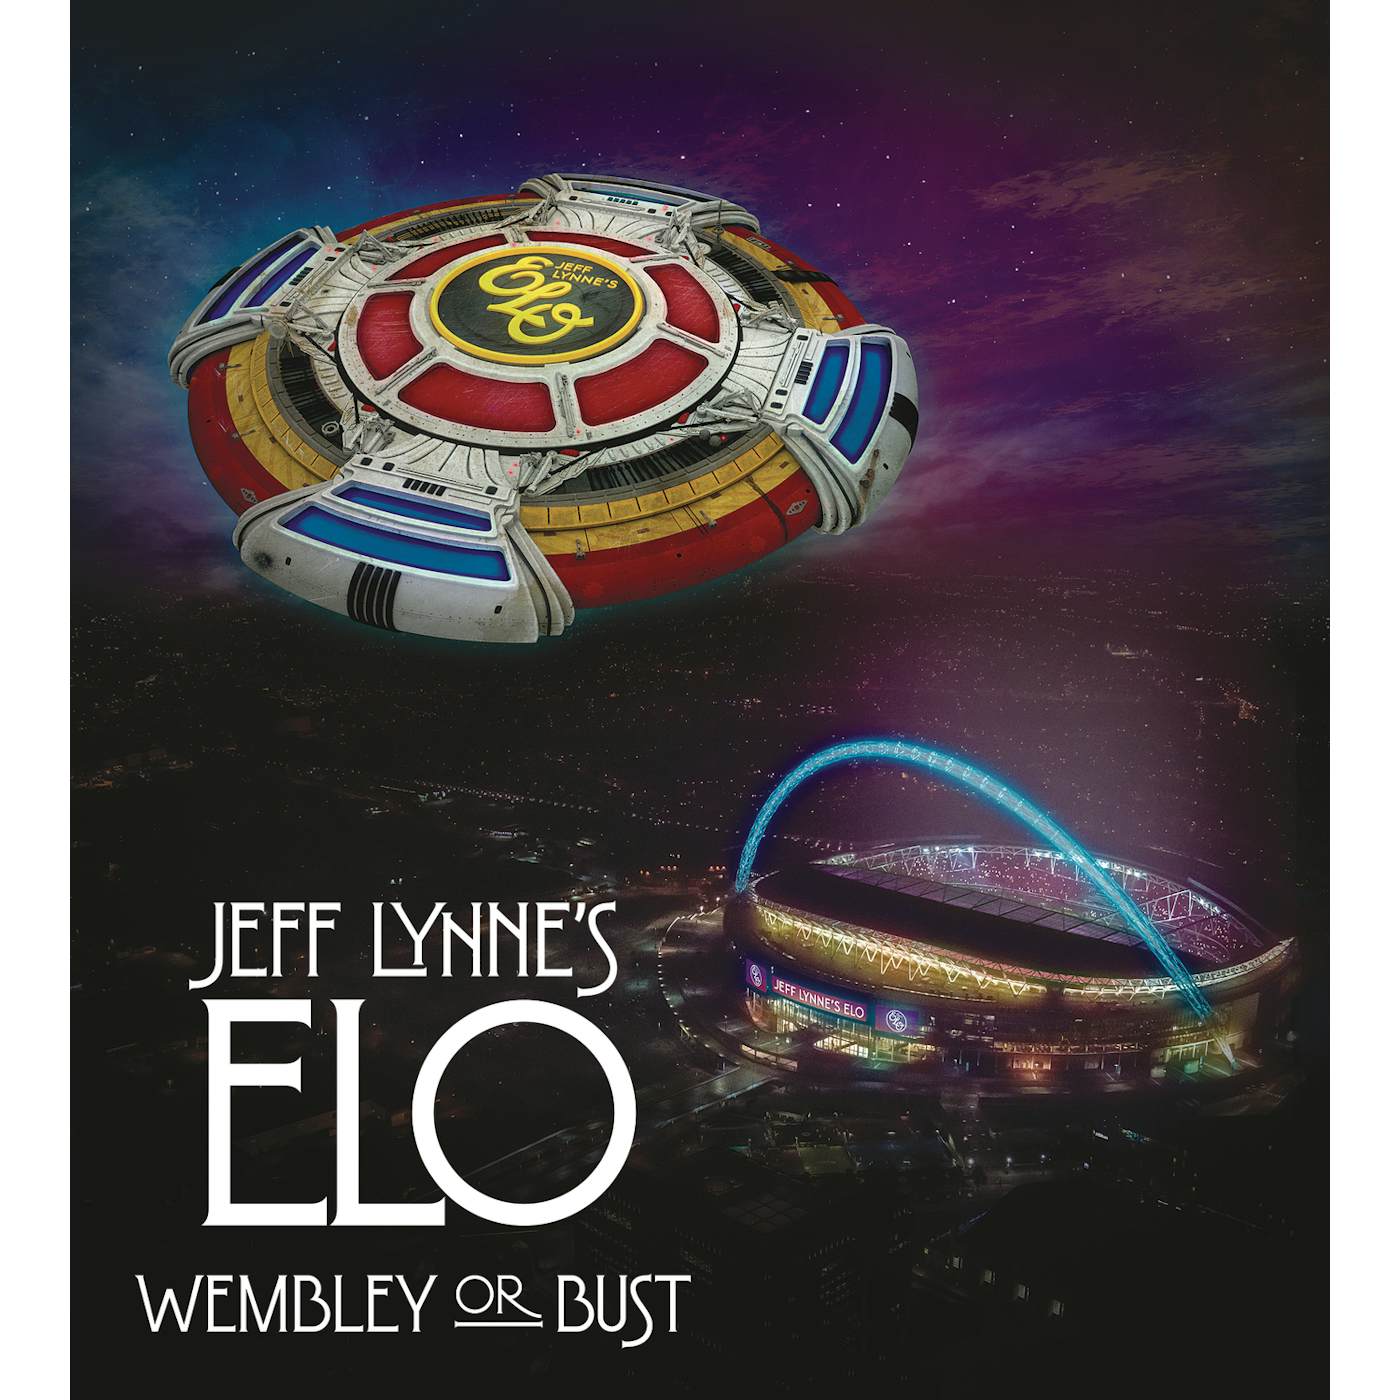 ELO (Electric Light Orchestra): WEMBLEY OR BUST CD